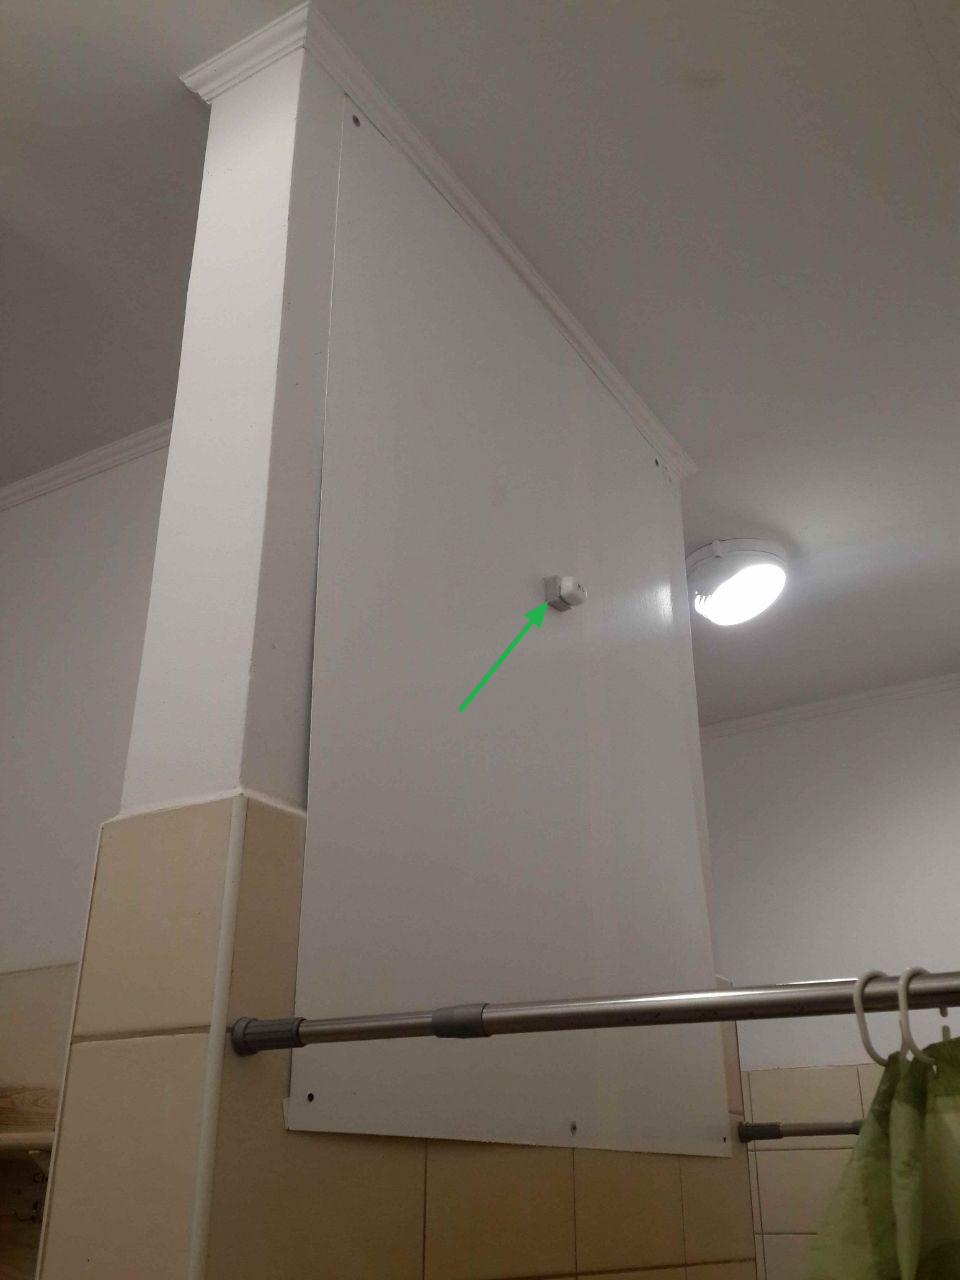 Digital beacon in the shower room